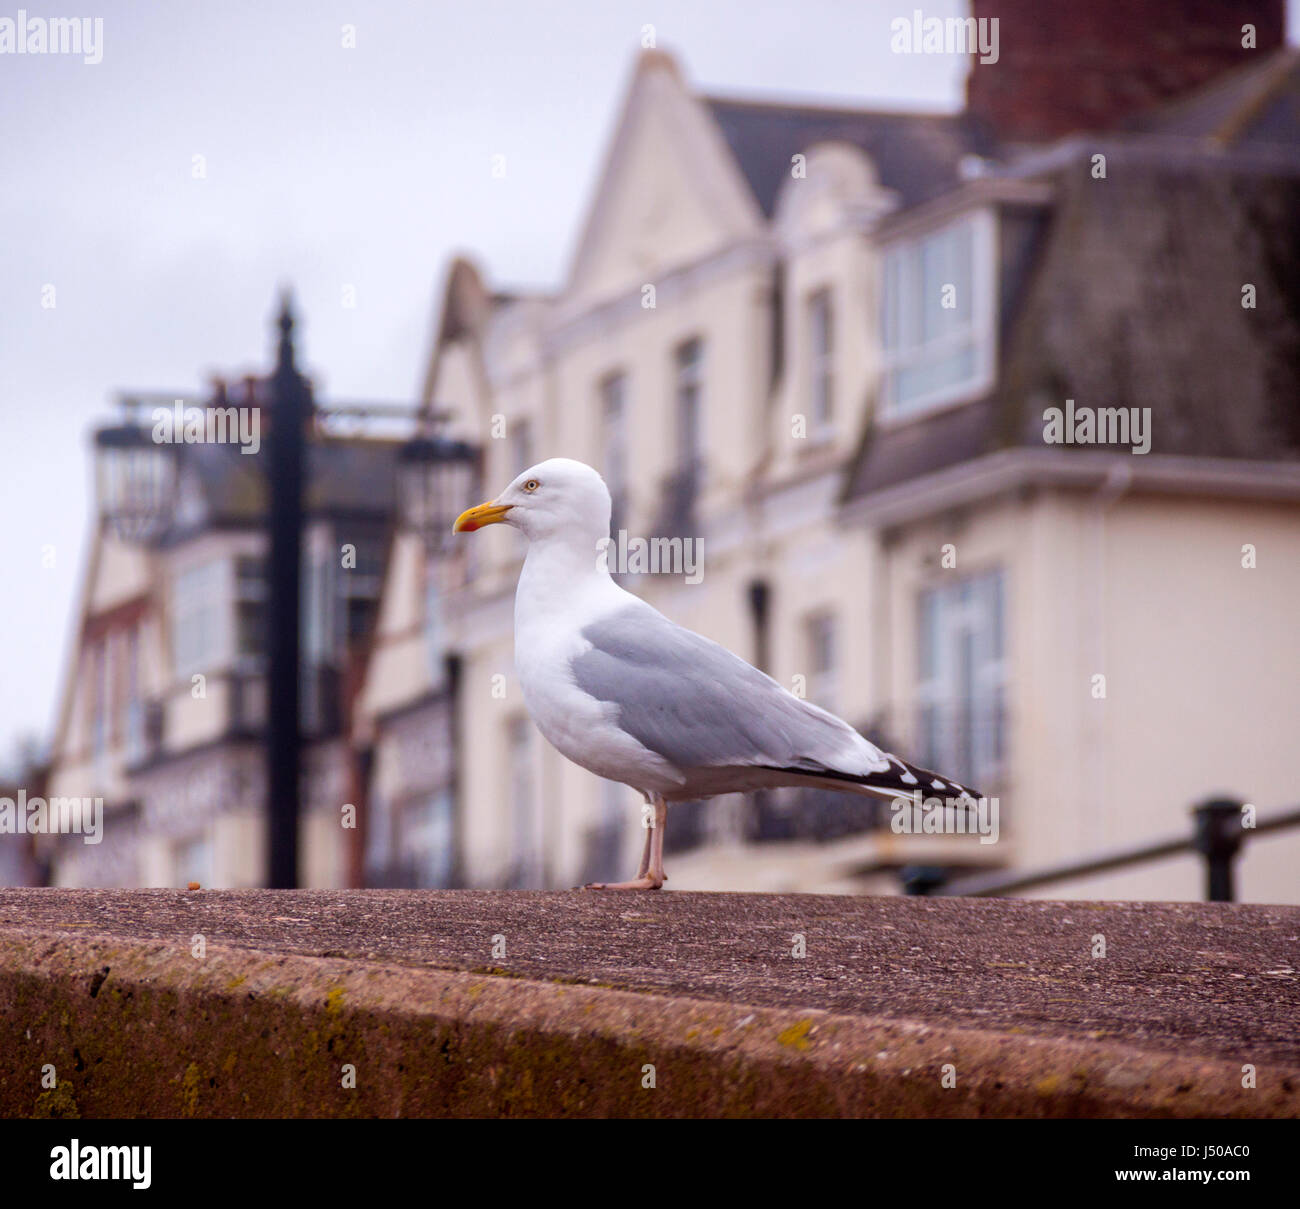 Sidmouth, Devon, UK. 15th May 2017 A seagull looks out on Sidmouth seafront as warning signs are erected telling people that there is an £80.00 fine for those caught feeding seagulls. Credit: South West Photos / Alamy Live News Stock Photo